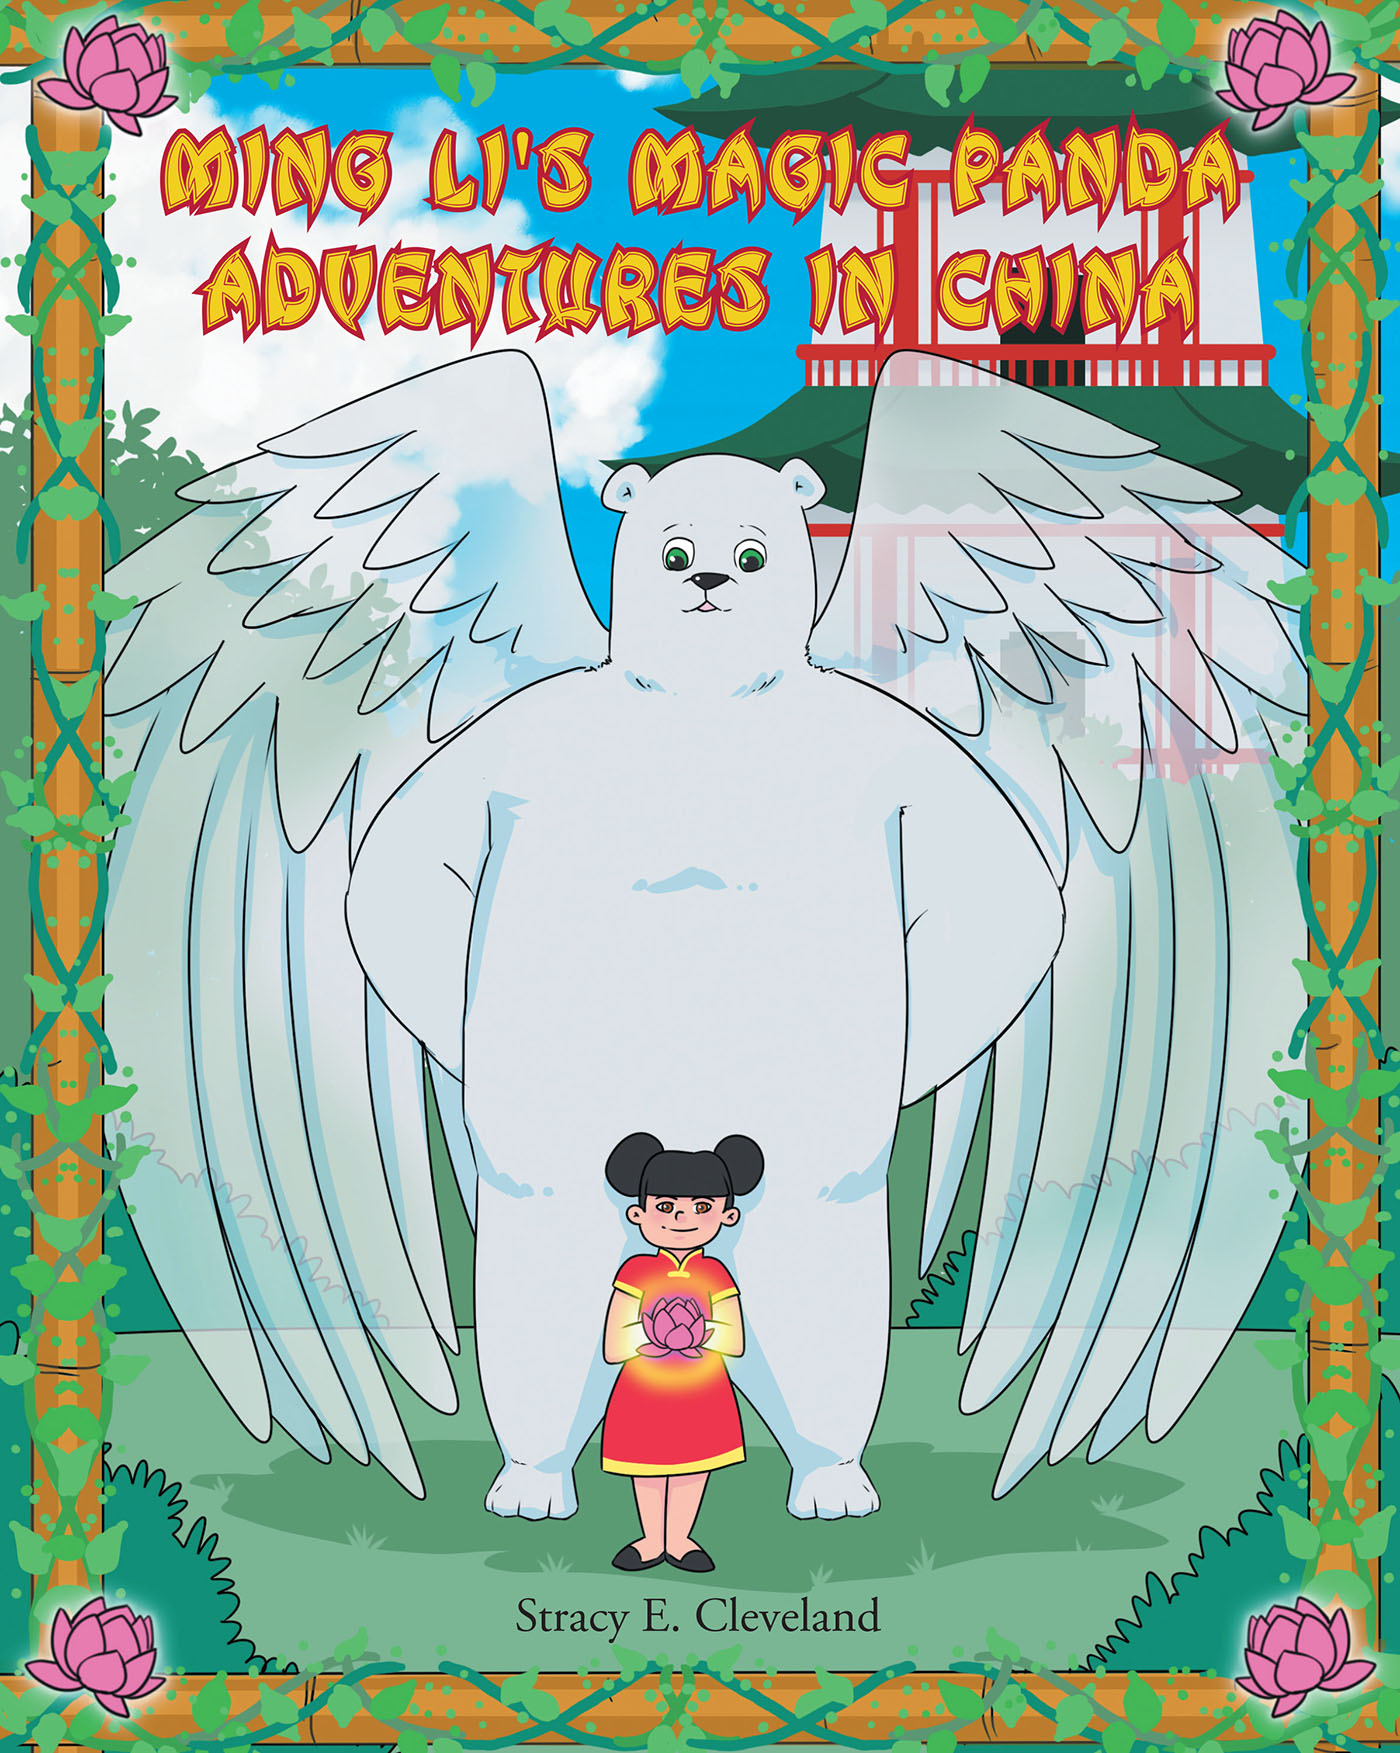 Stracy E. Cleveland’s Newly Released "Ming Li’s Magic Panda: Adventures in China" is a Creative Adventure That Explores the Wonders of China